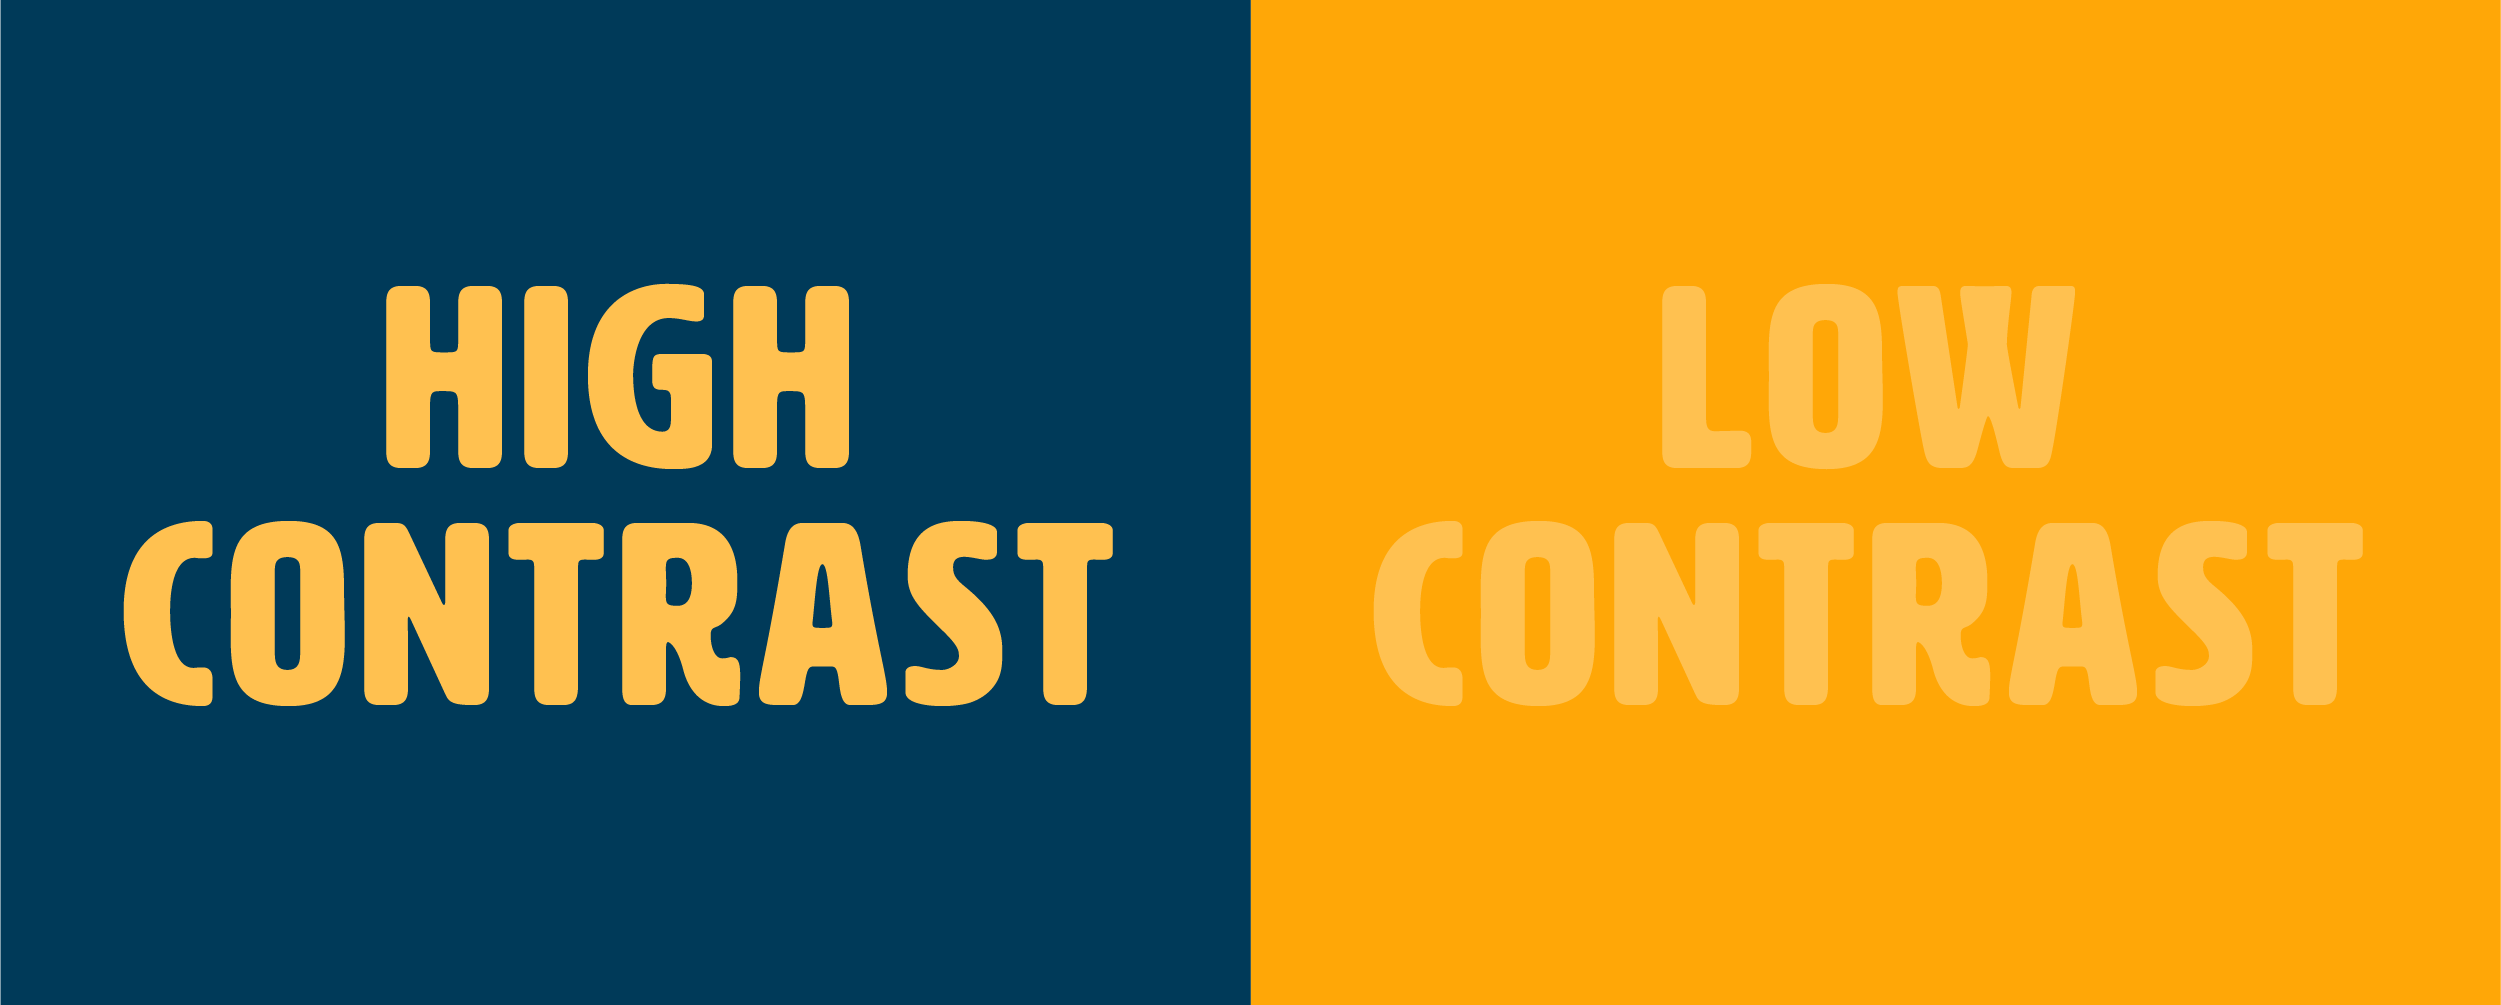 The words "high contrast" in yellow on a navy background and the words "low contrast" in yellow on a slightly darker yellow background